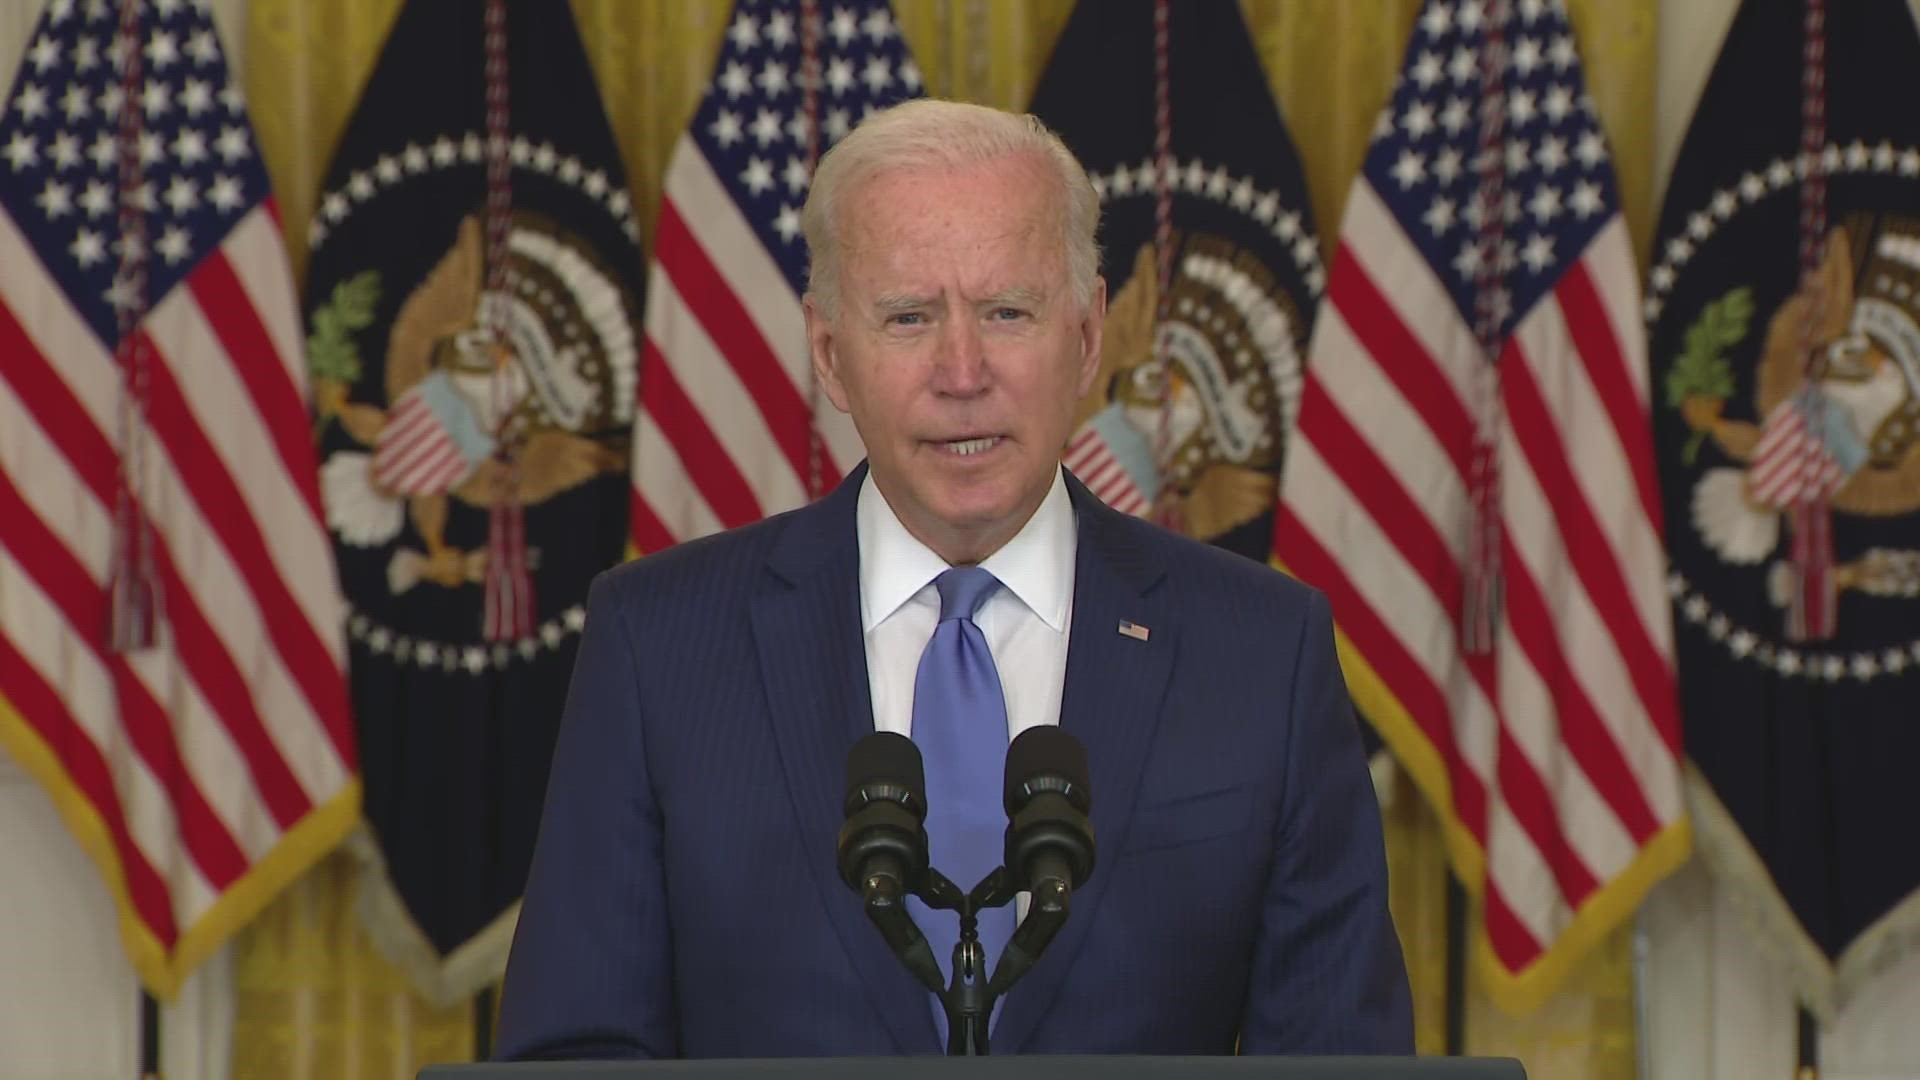 President Joe Biden said Thursday that he thinks the nation is at an "inflection point."